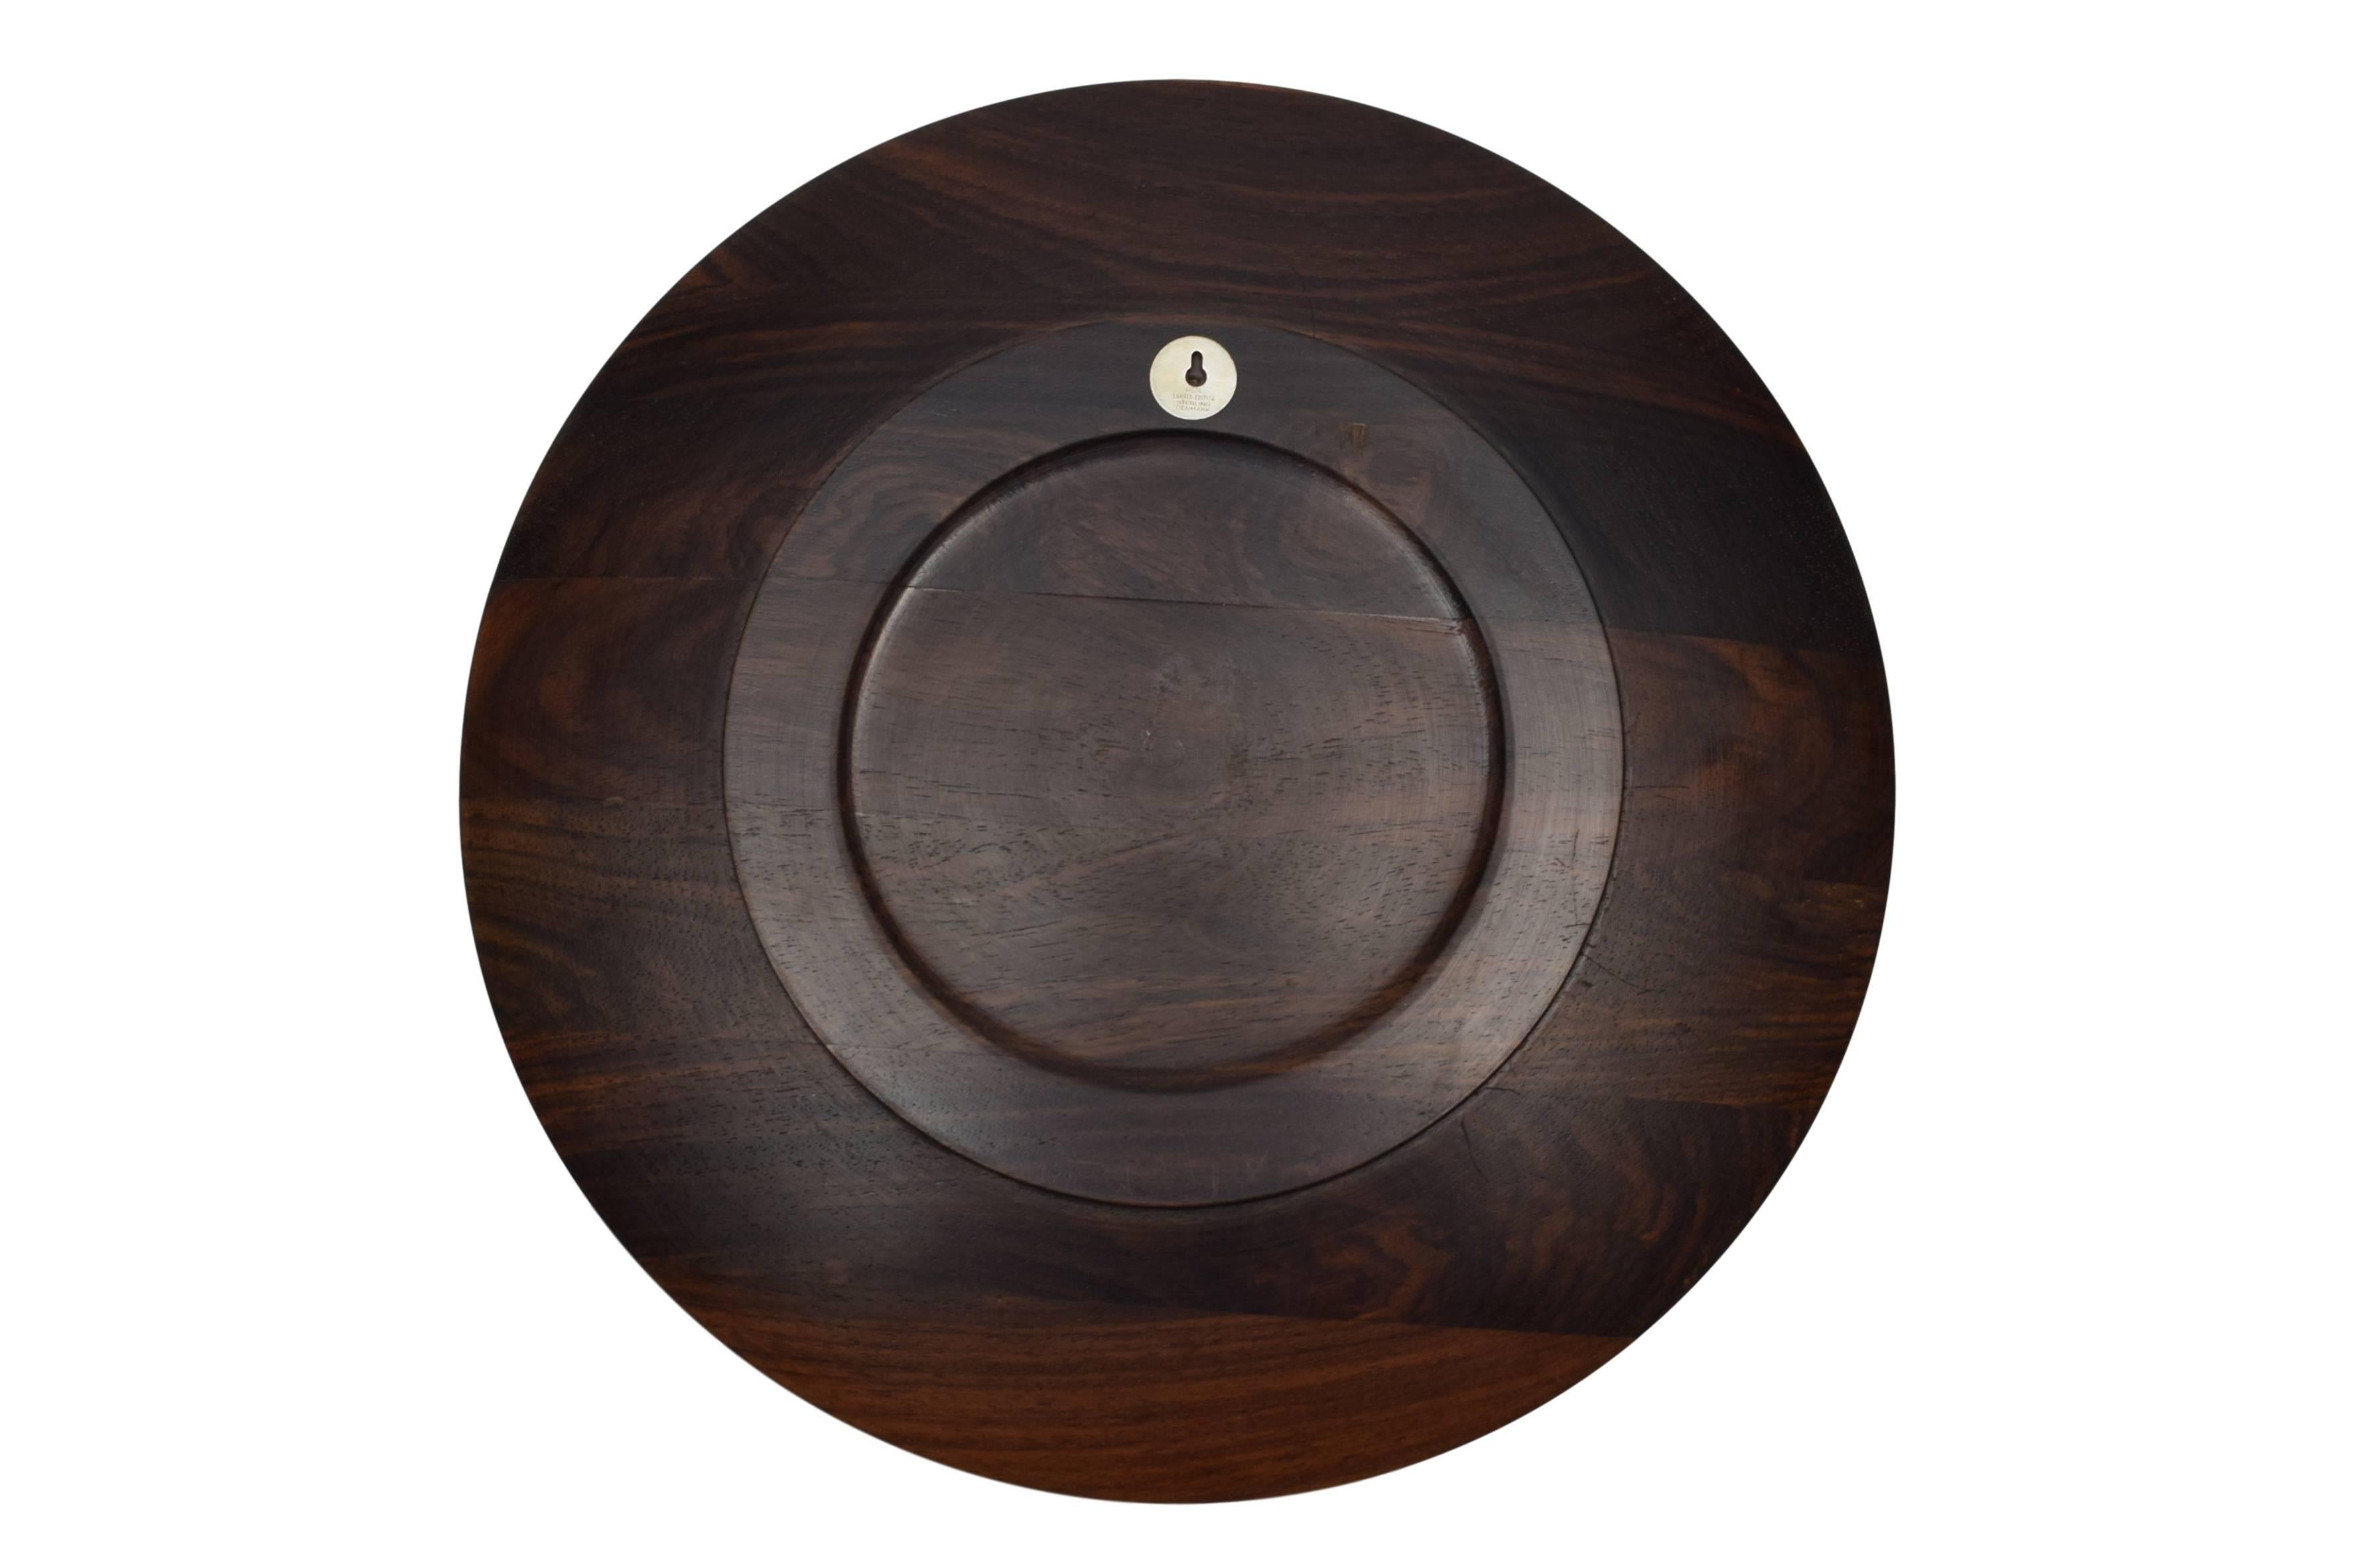 A Danish midcentury rosewood plate or wall platter with sterling silver inlays depicting a Greenlandic motive. Design by Robert Dalgas Lassen.

These platters were made in a limited edition. The platters were produced in Denmark from 1970 to 1989.